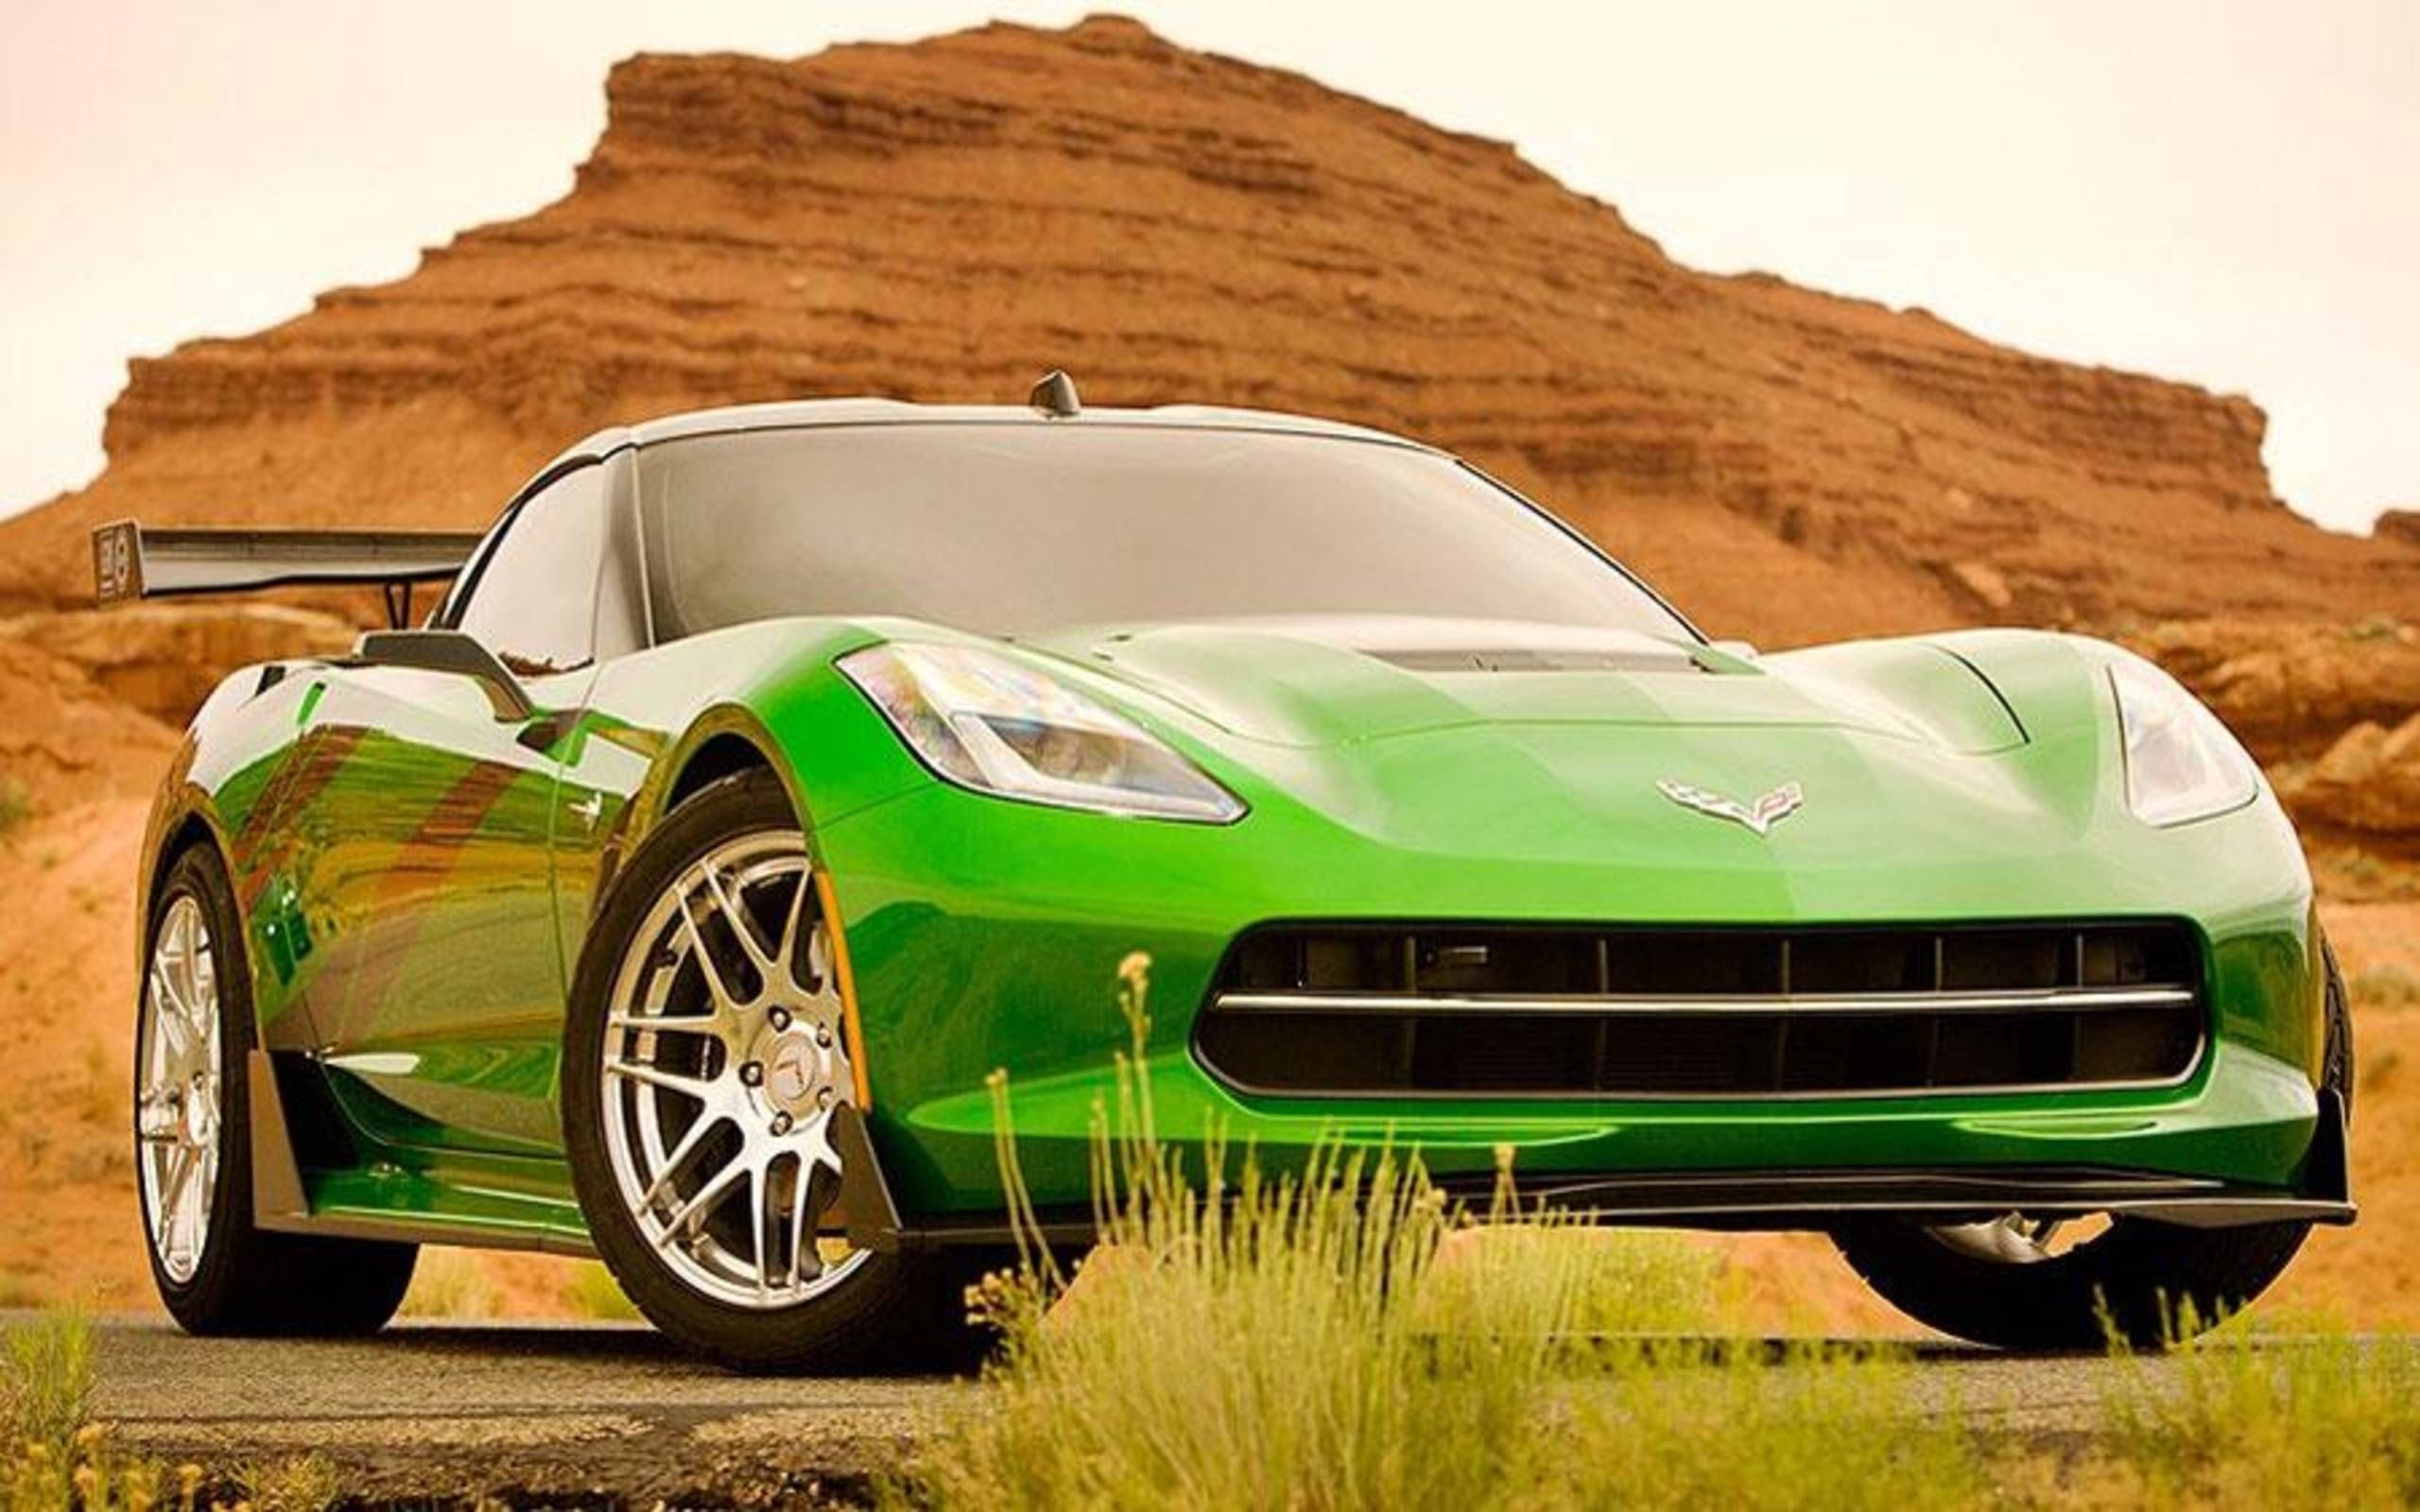 Transformers 4' features lime-green 